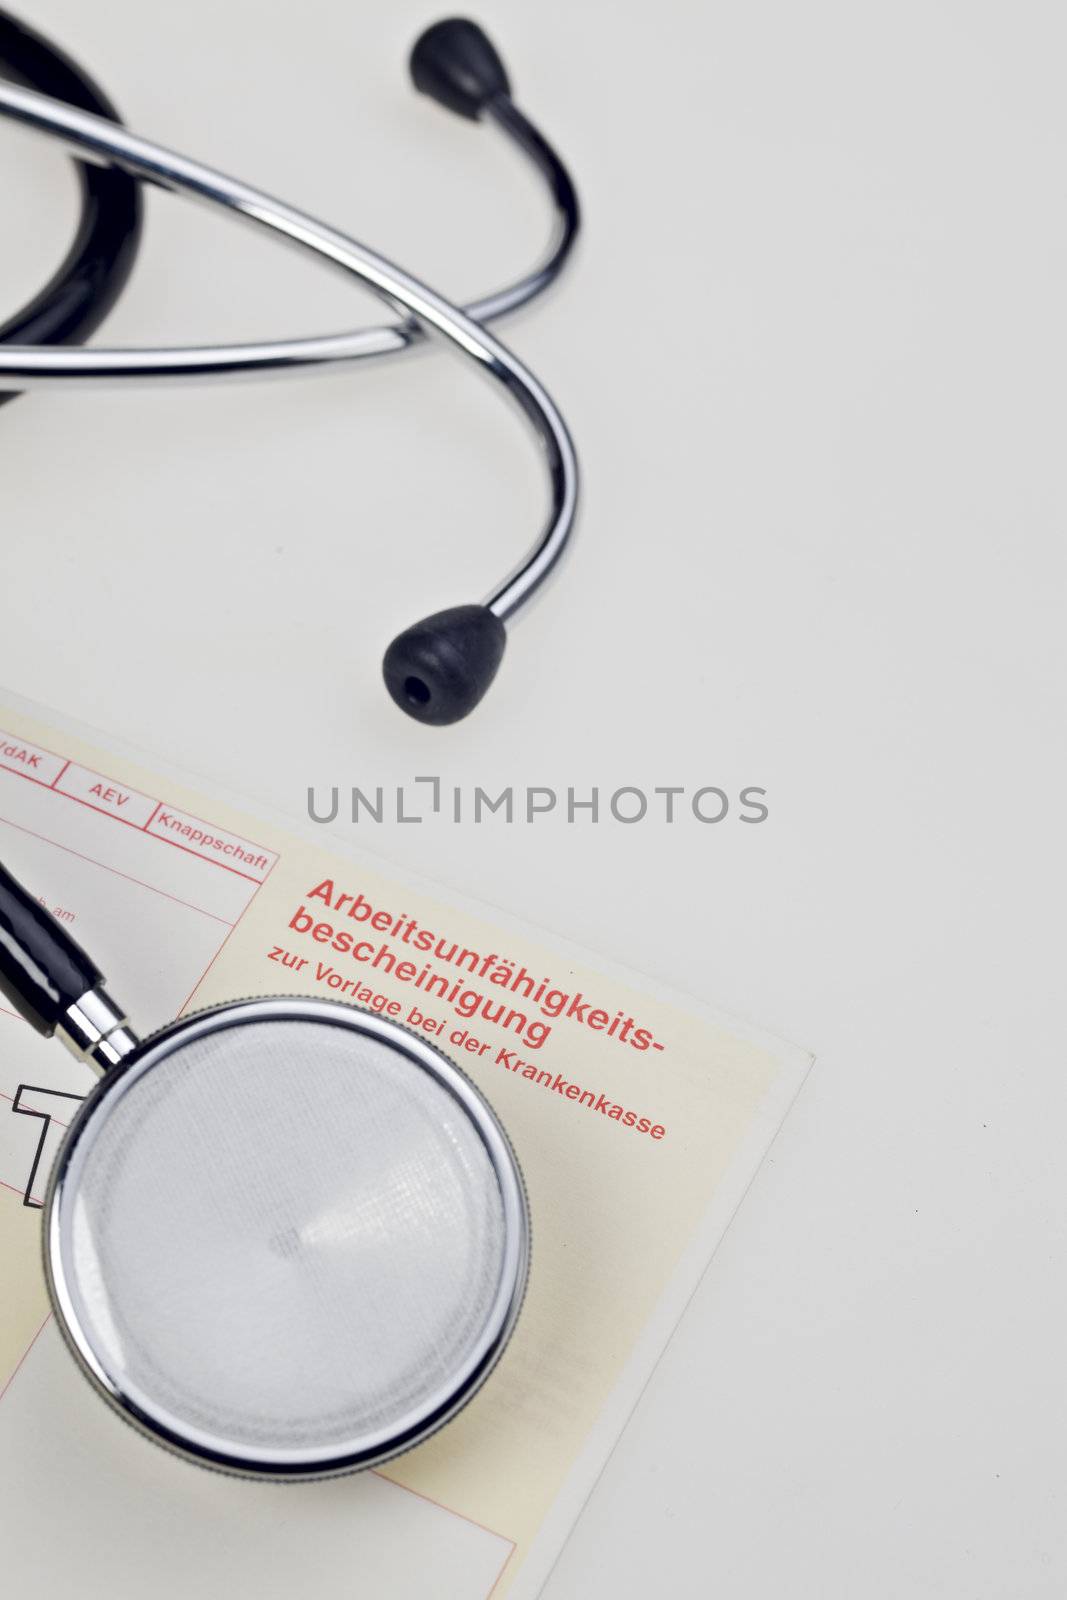 stethoscope and forms